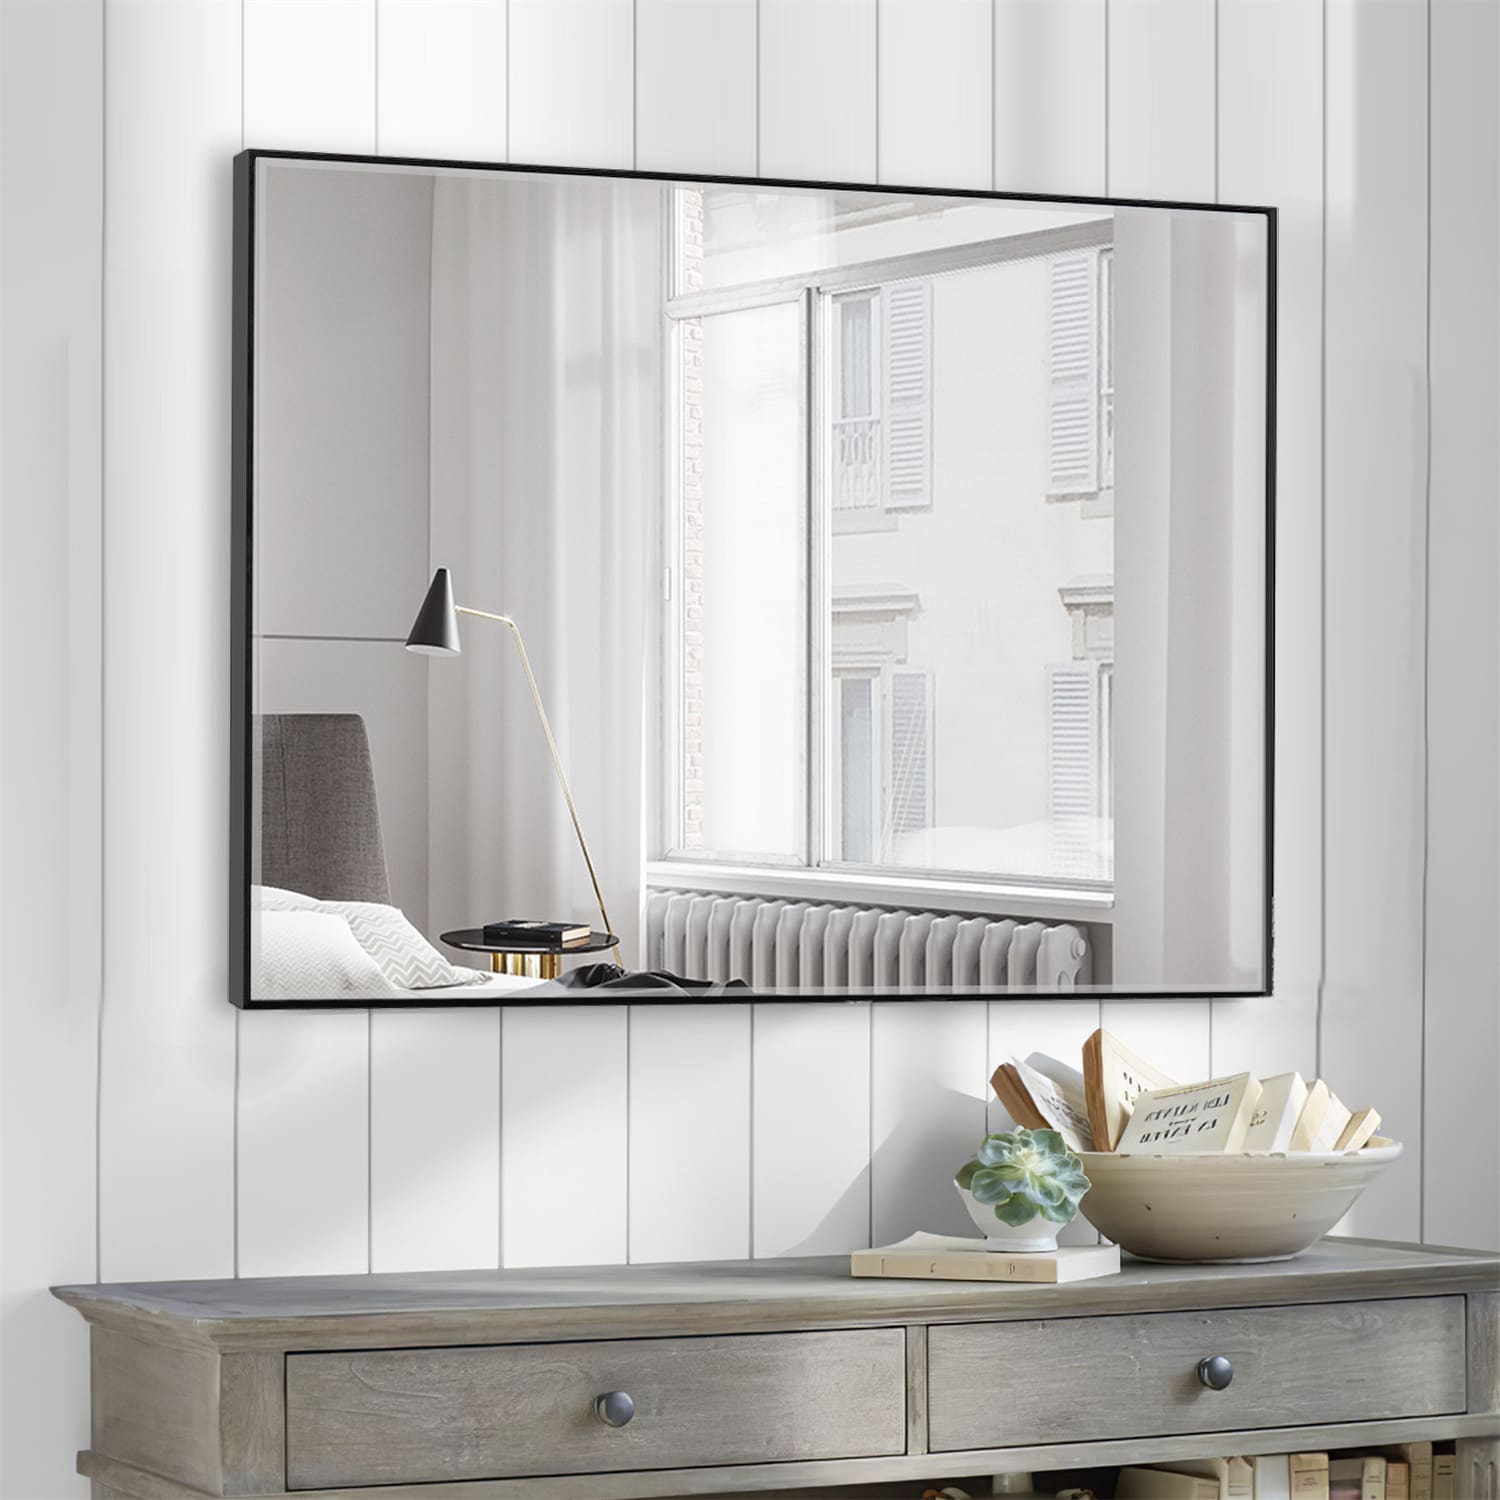 NeuType 24-in W x 36-in H Black Framed Wall Mirror in the Mirrors ...